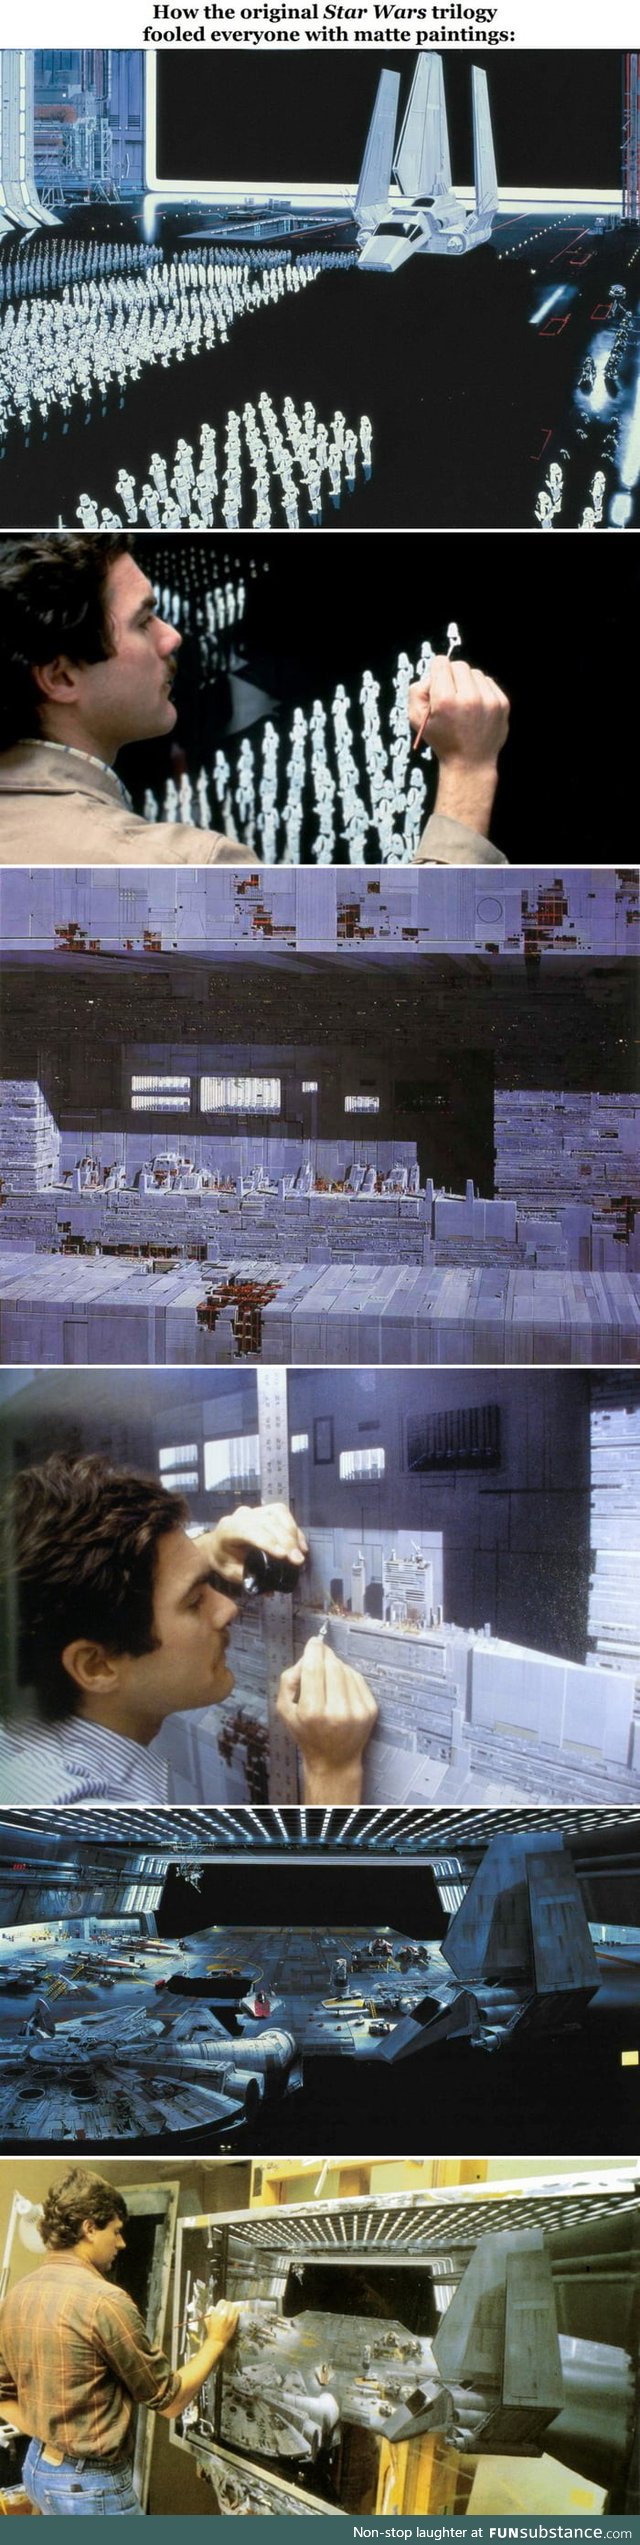 The first Star Wars trilogy used so detailed paintings as backgrounds in the movies that